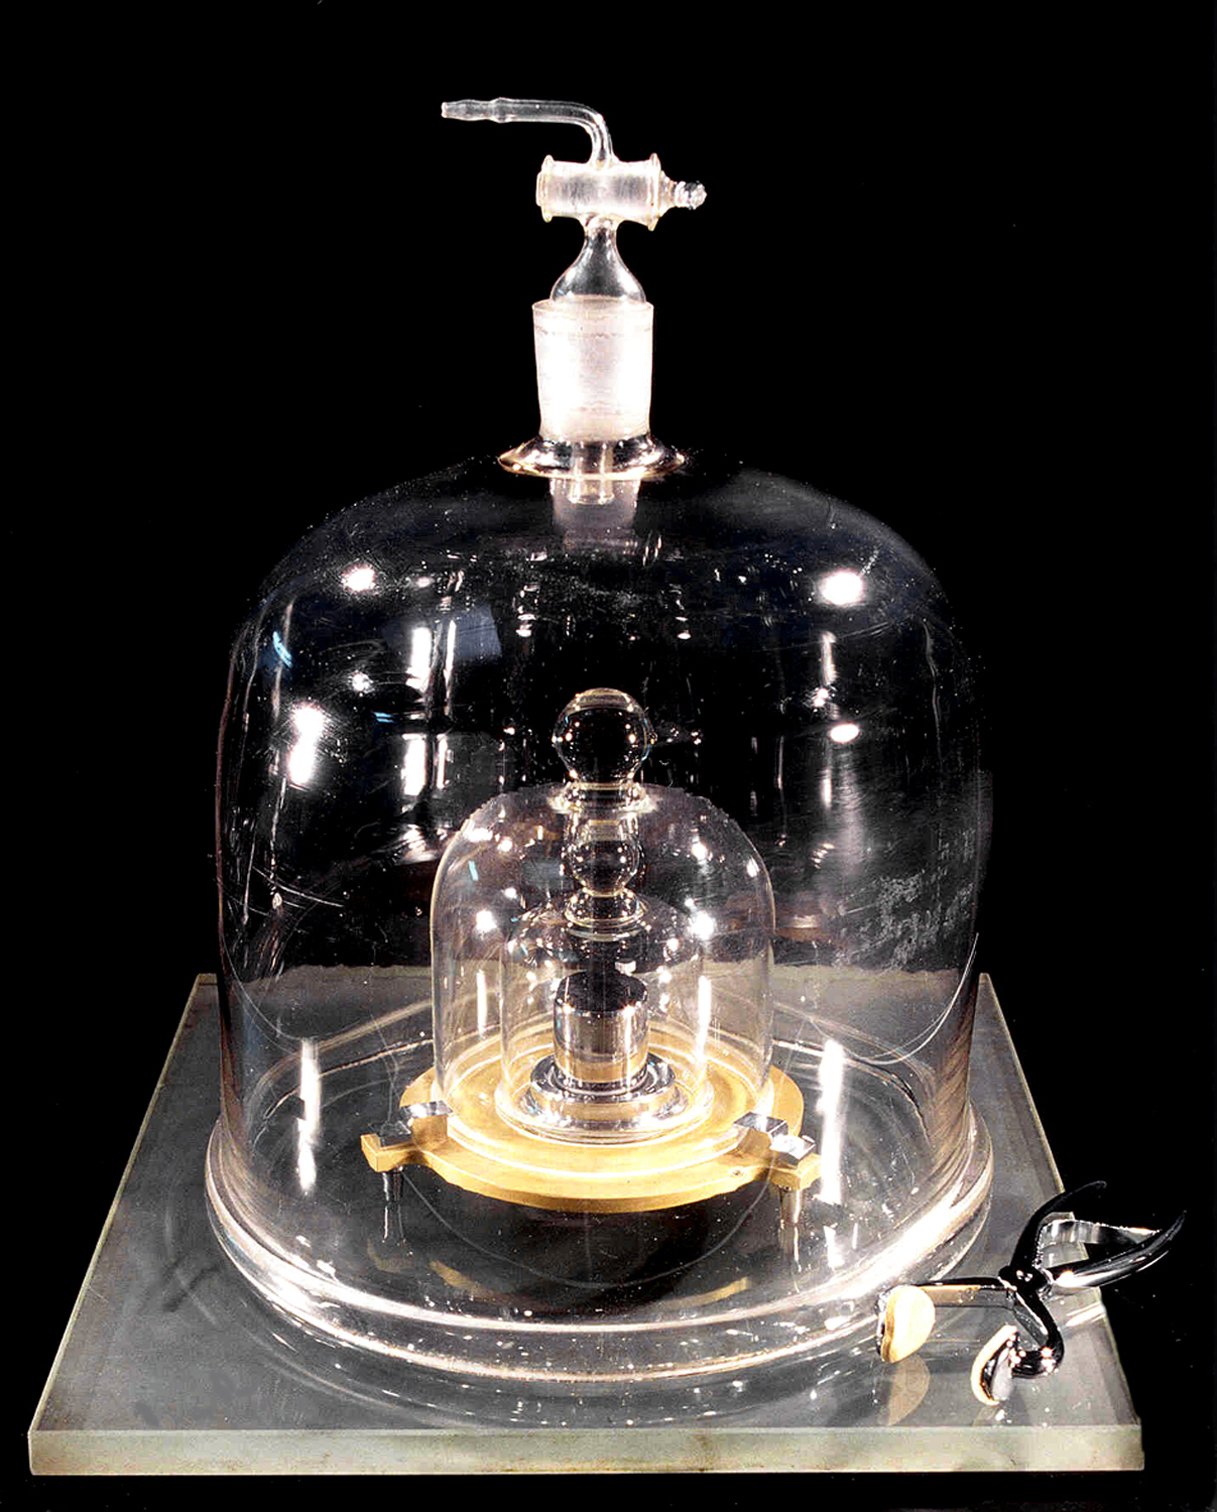 a metal cylinder placed in a tightly secured glass bell jar.